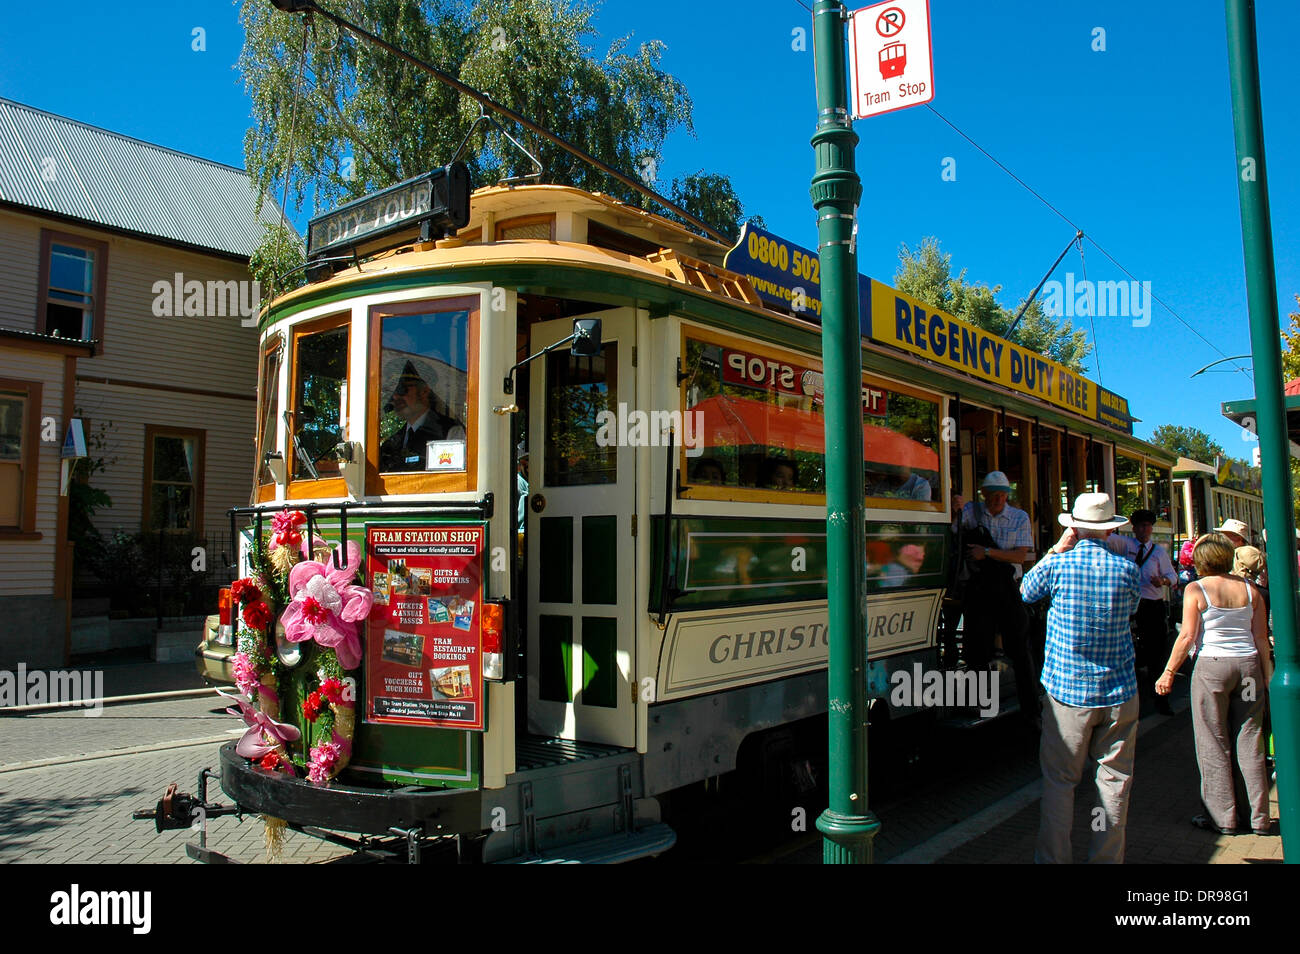 Tram passing in Christchurch, New Zealand Stock Photo